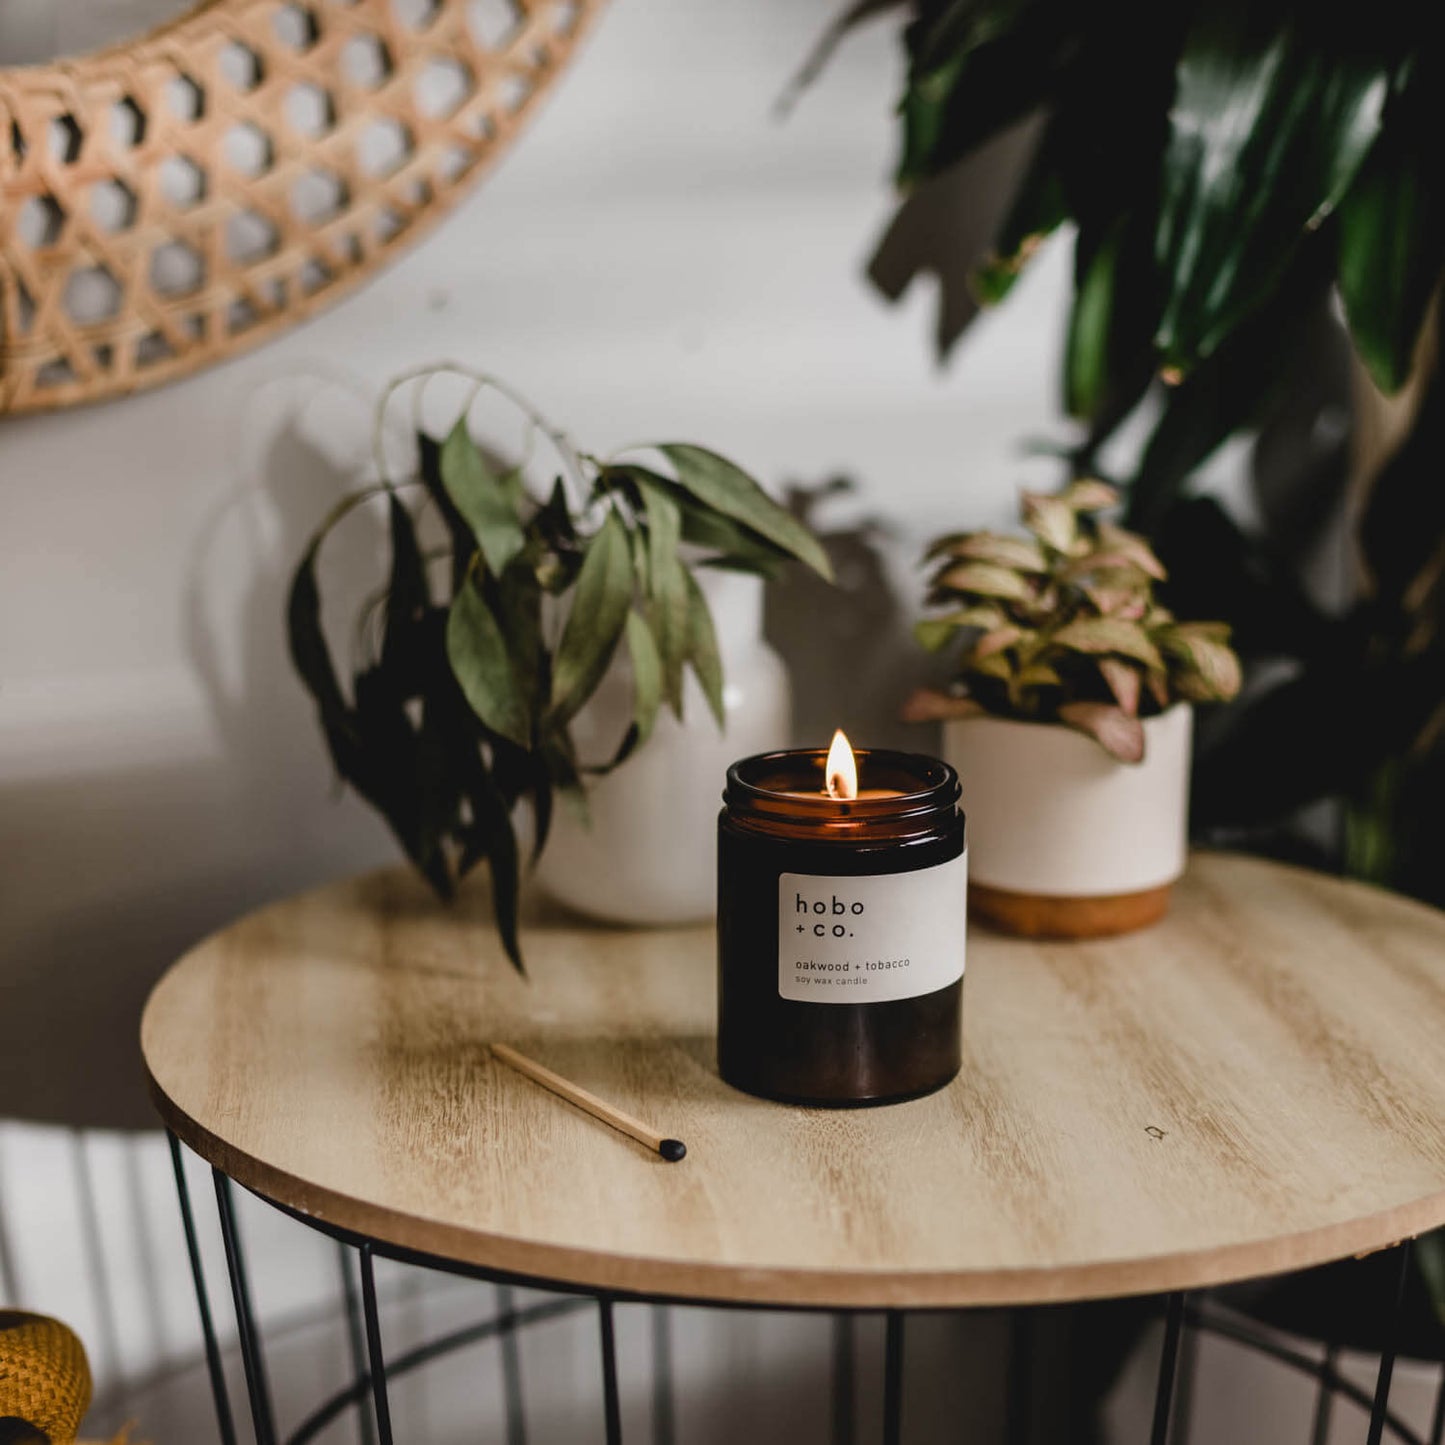 Oakwood & Tobacco Scented Candle by Hobo & Co.